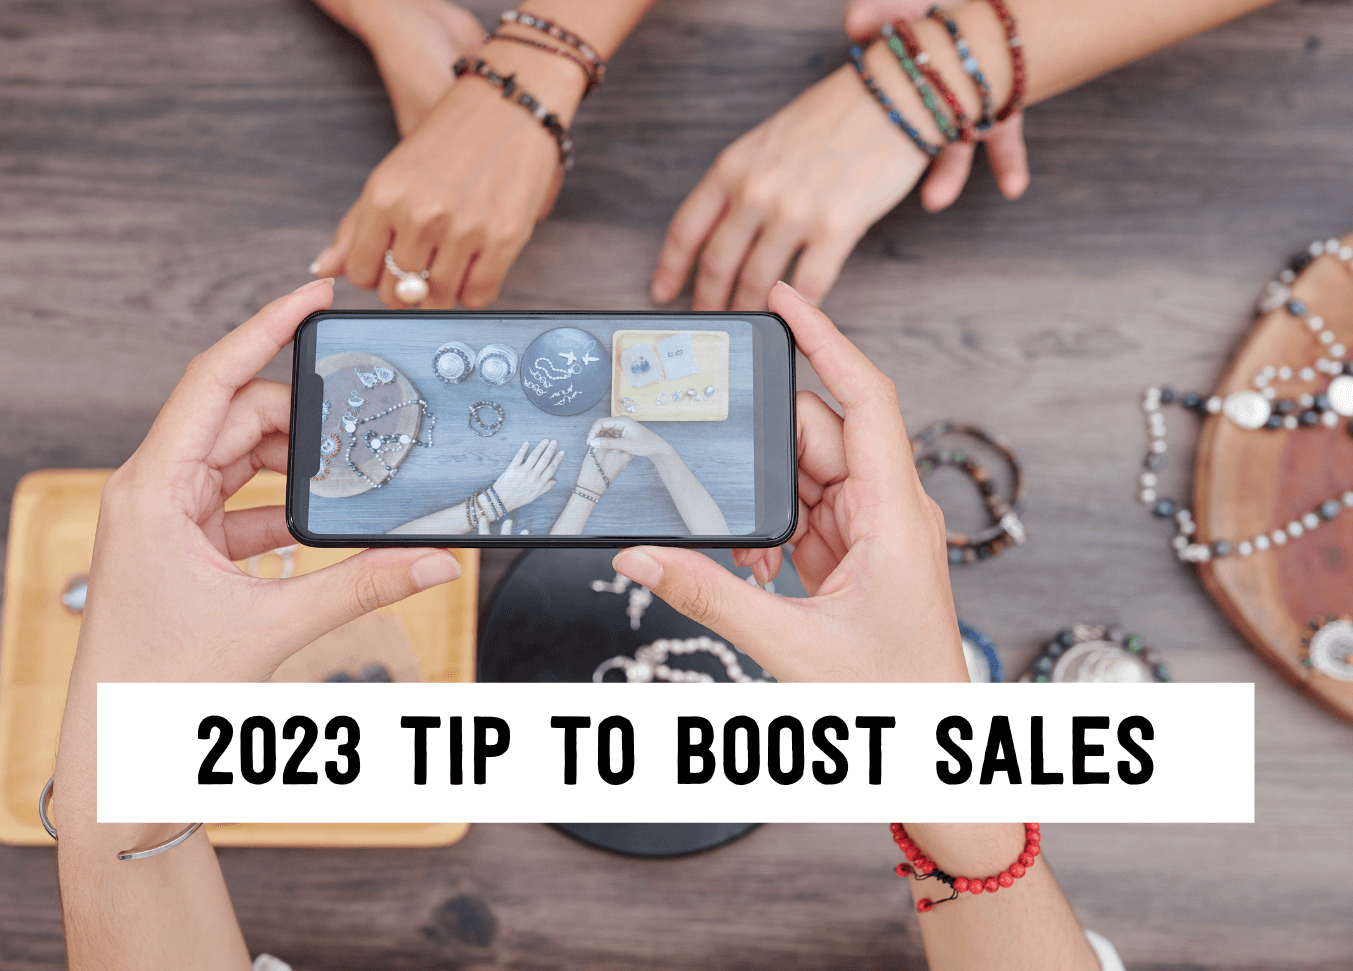 2023 tip to boost sales | Tizzit.co - start and grow a successful handmade business